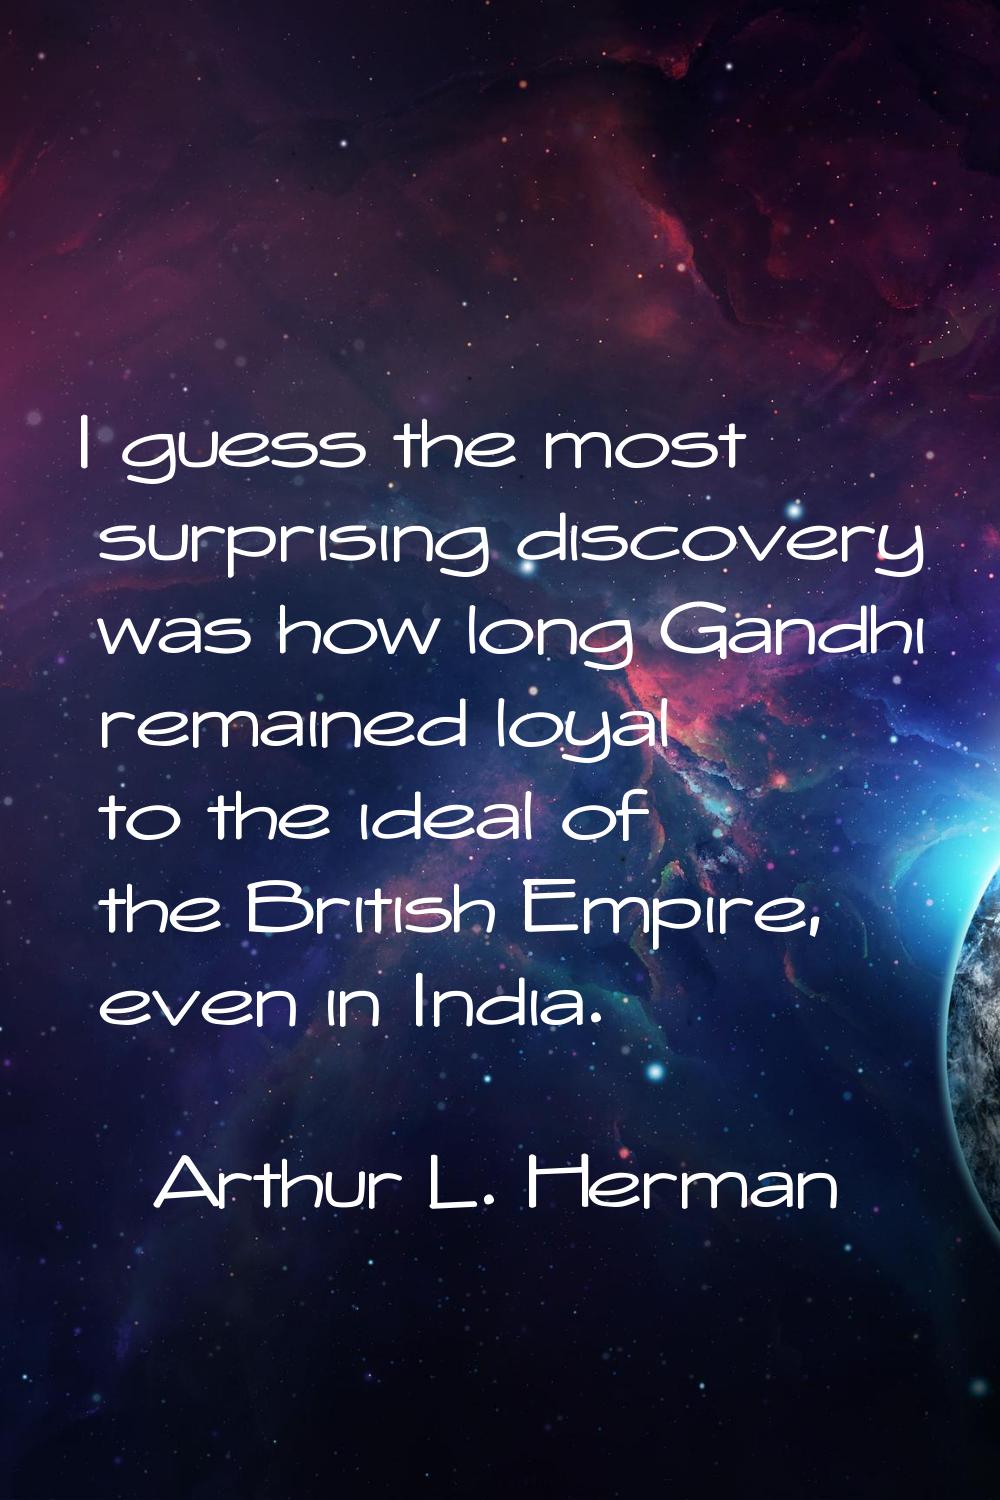 I guess the most surprising discovery was how long Gandhi remained loyal to the ideal of the Britis